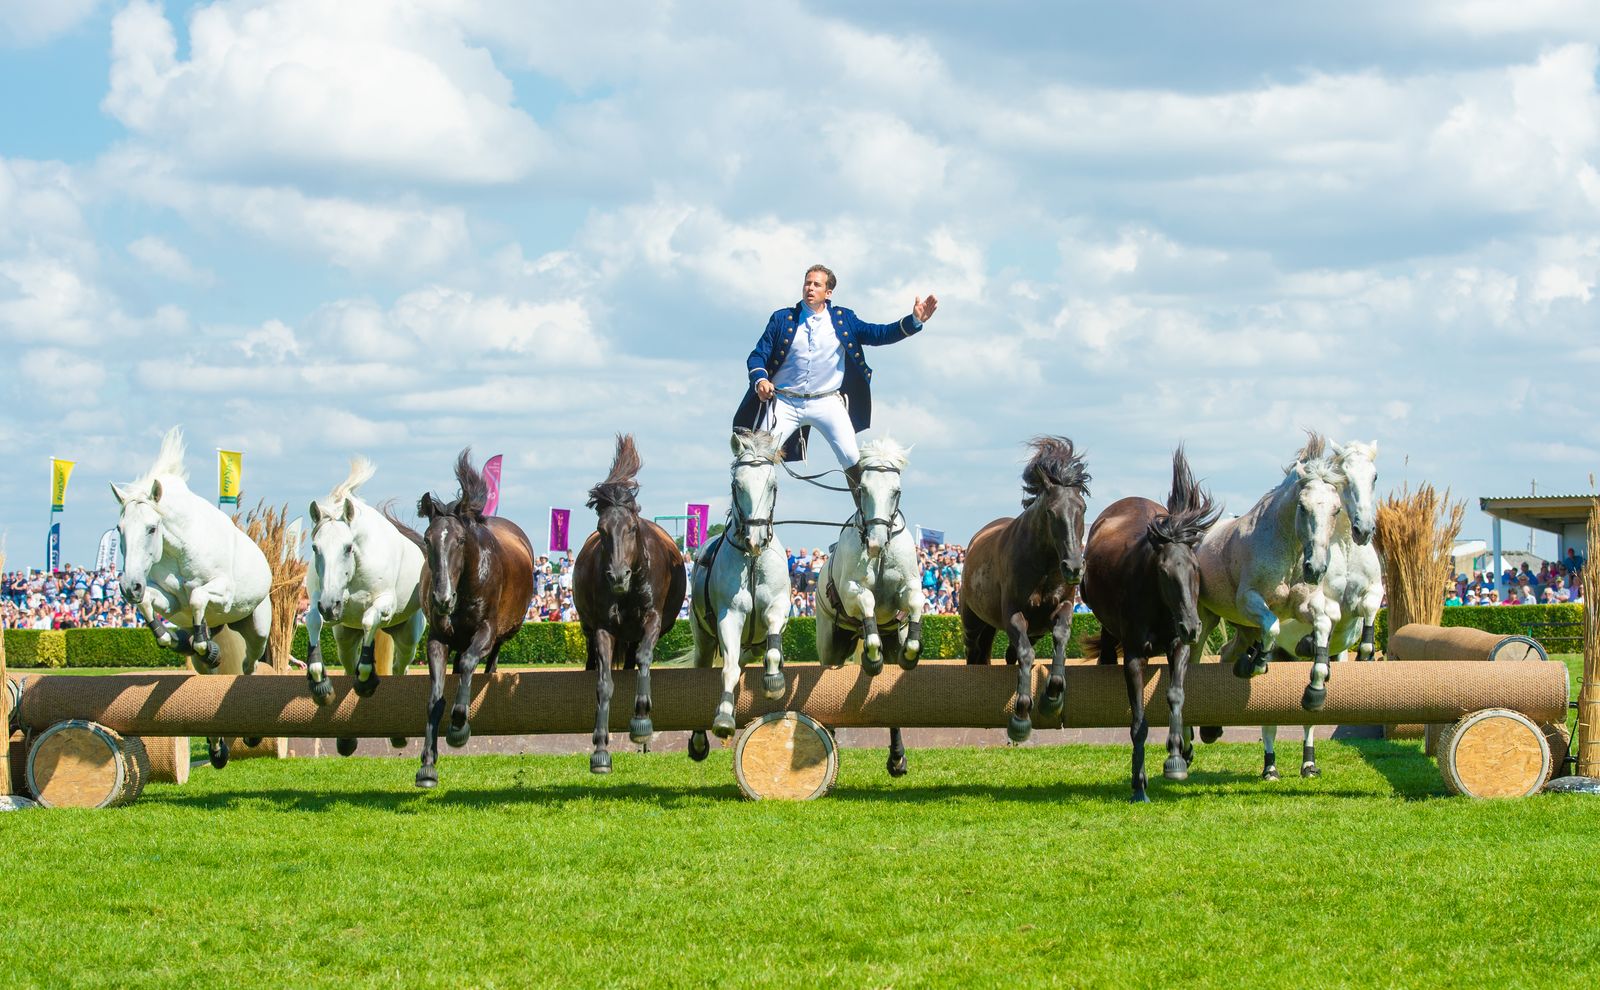 Lorenzo announced as main ring performer at Great Yorkshire Show 2023